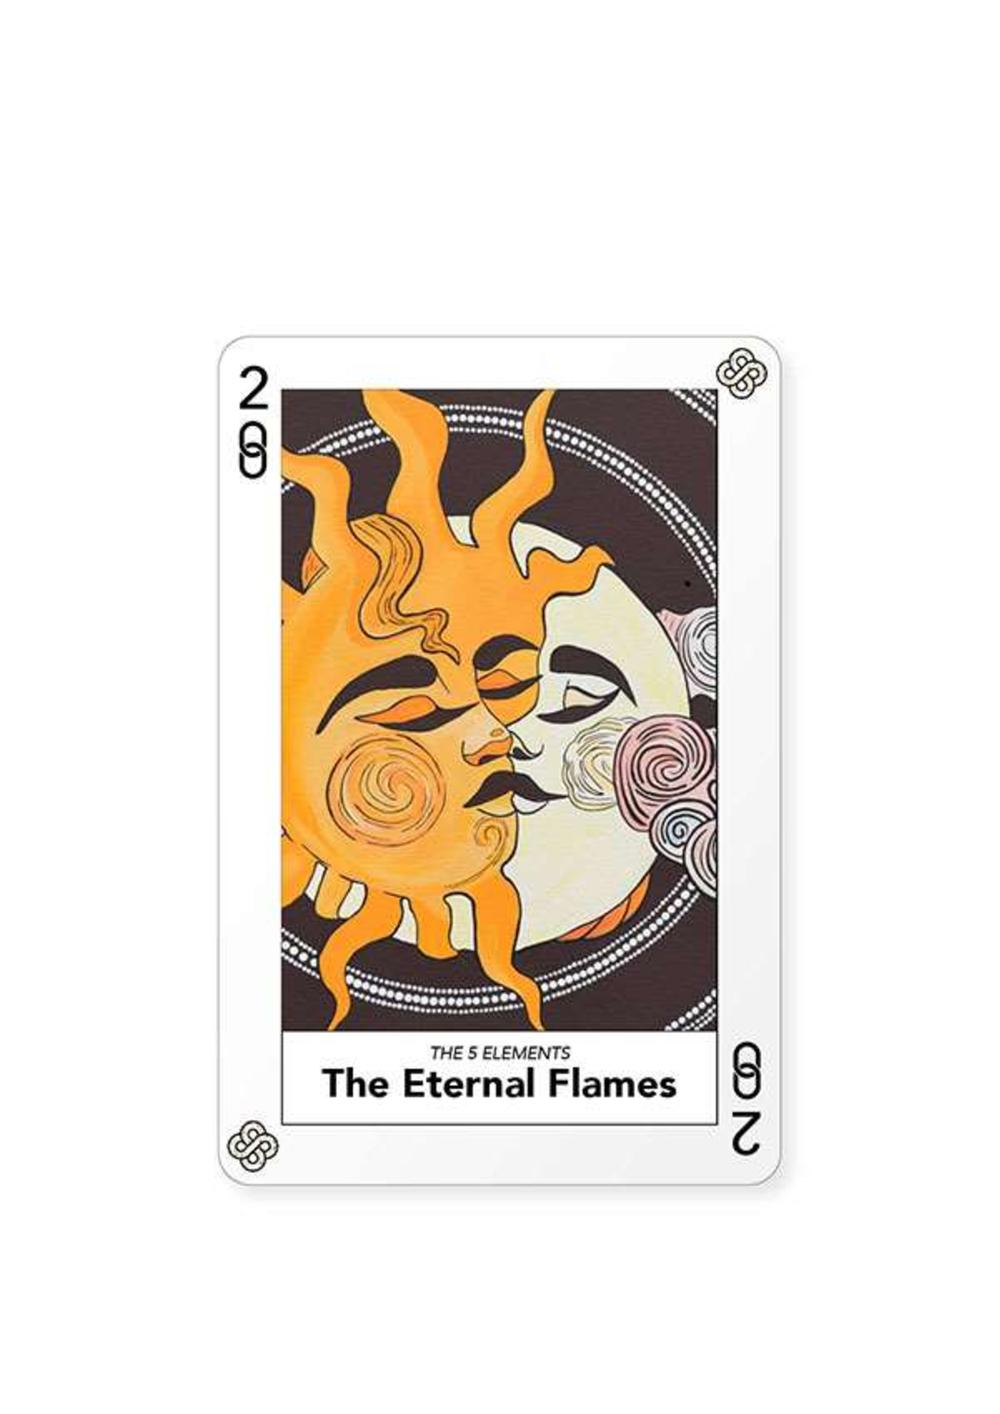 Certificate of Authenticity and Consignment - The Eternal Flames